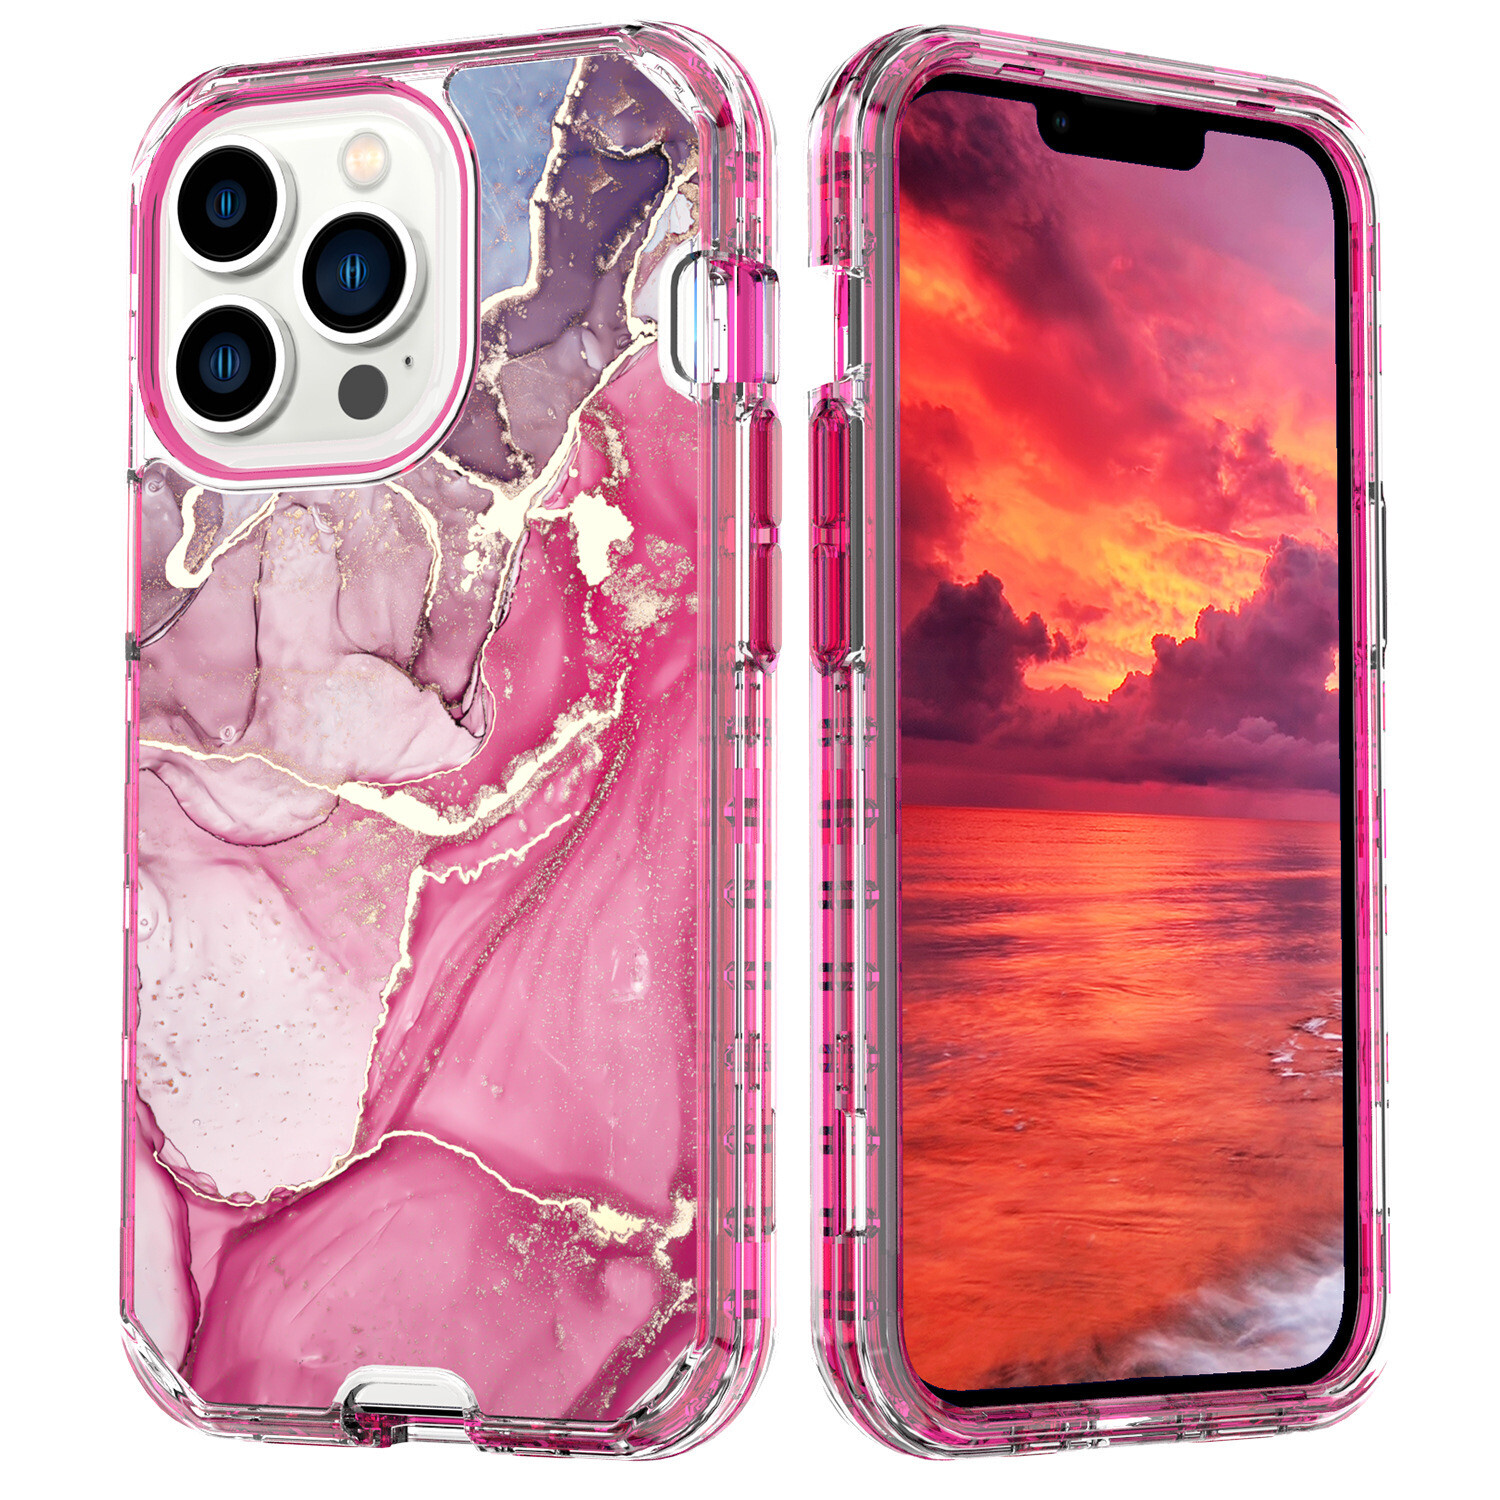 iPhone X / XS 5.8 Shock Proof Robot Case With Pattern